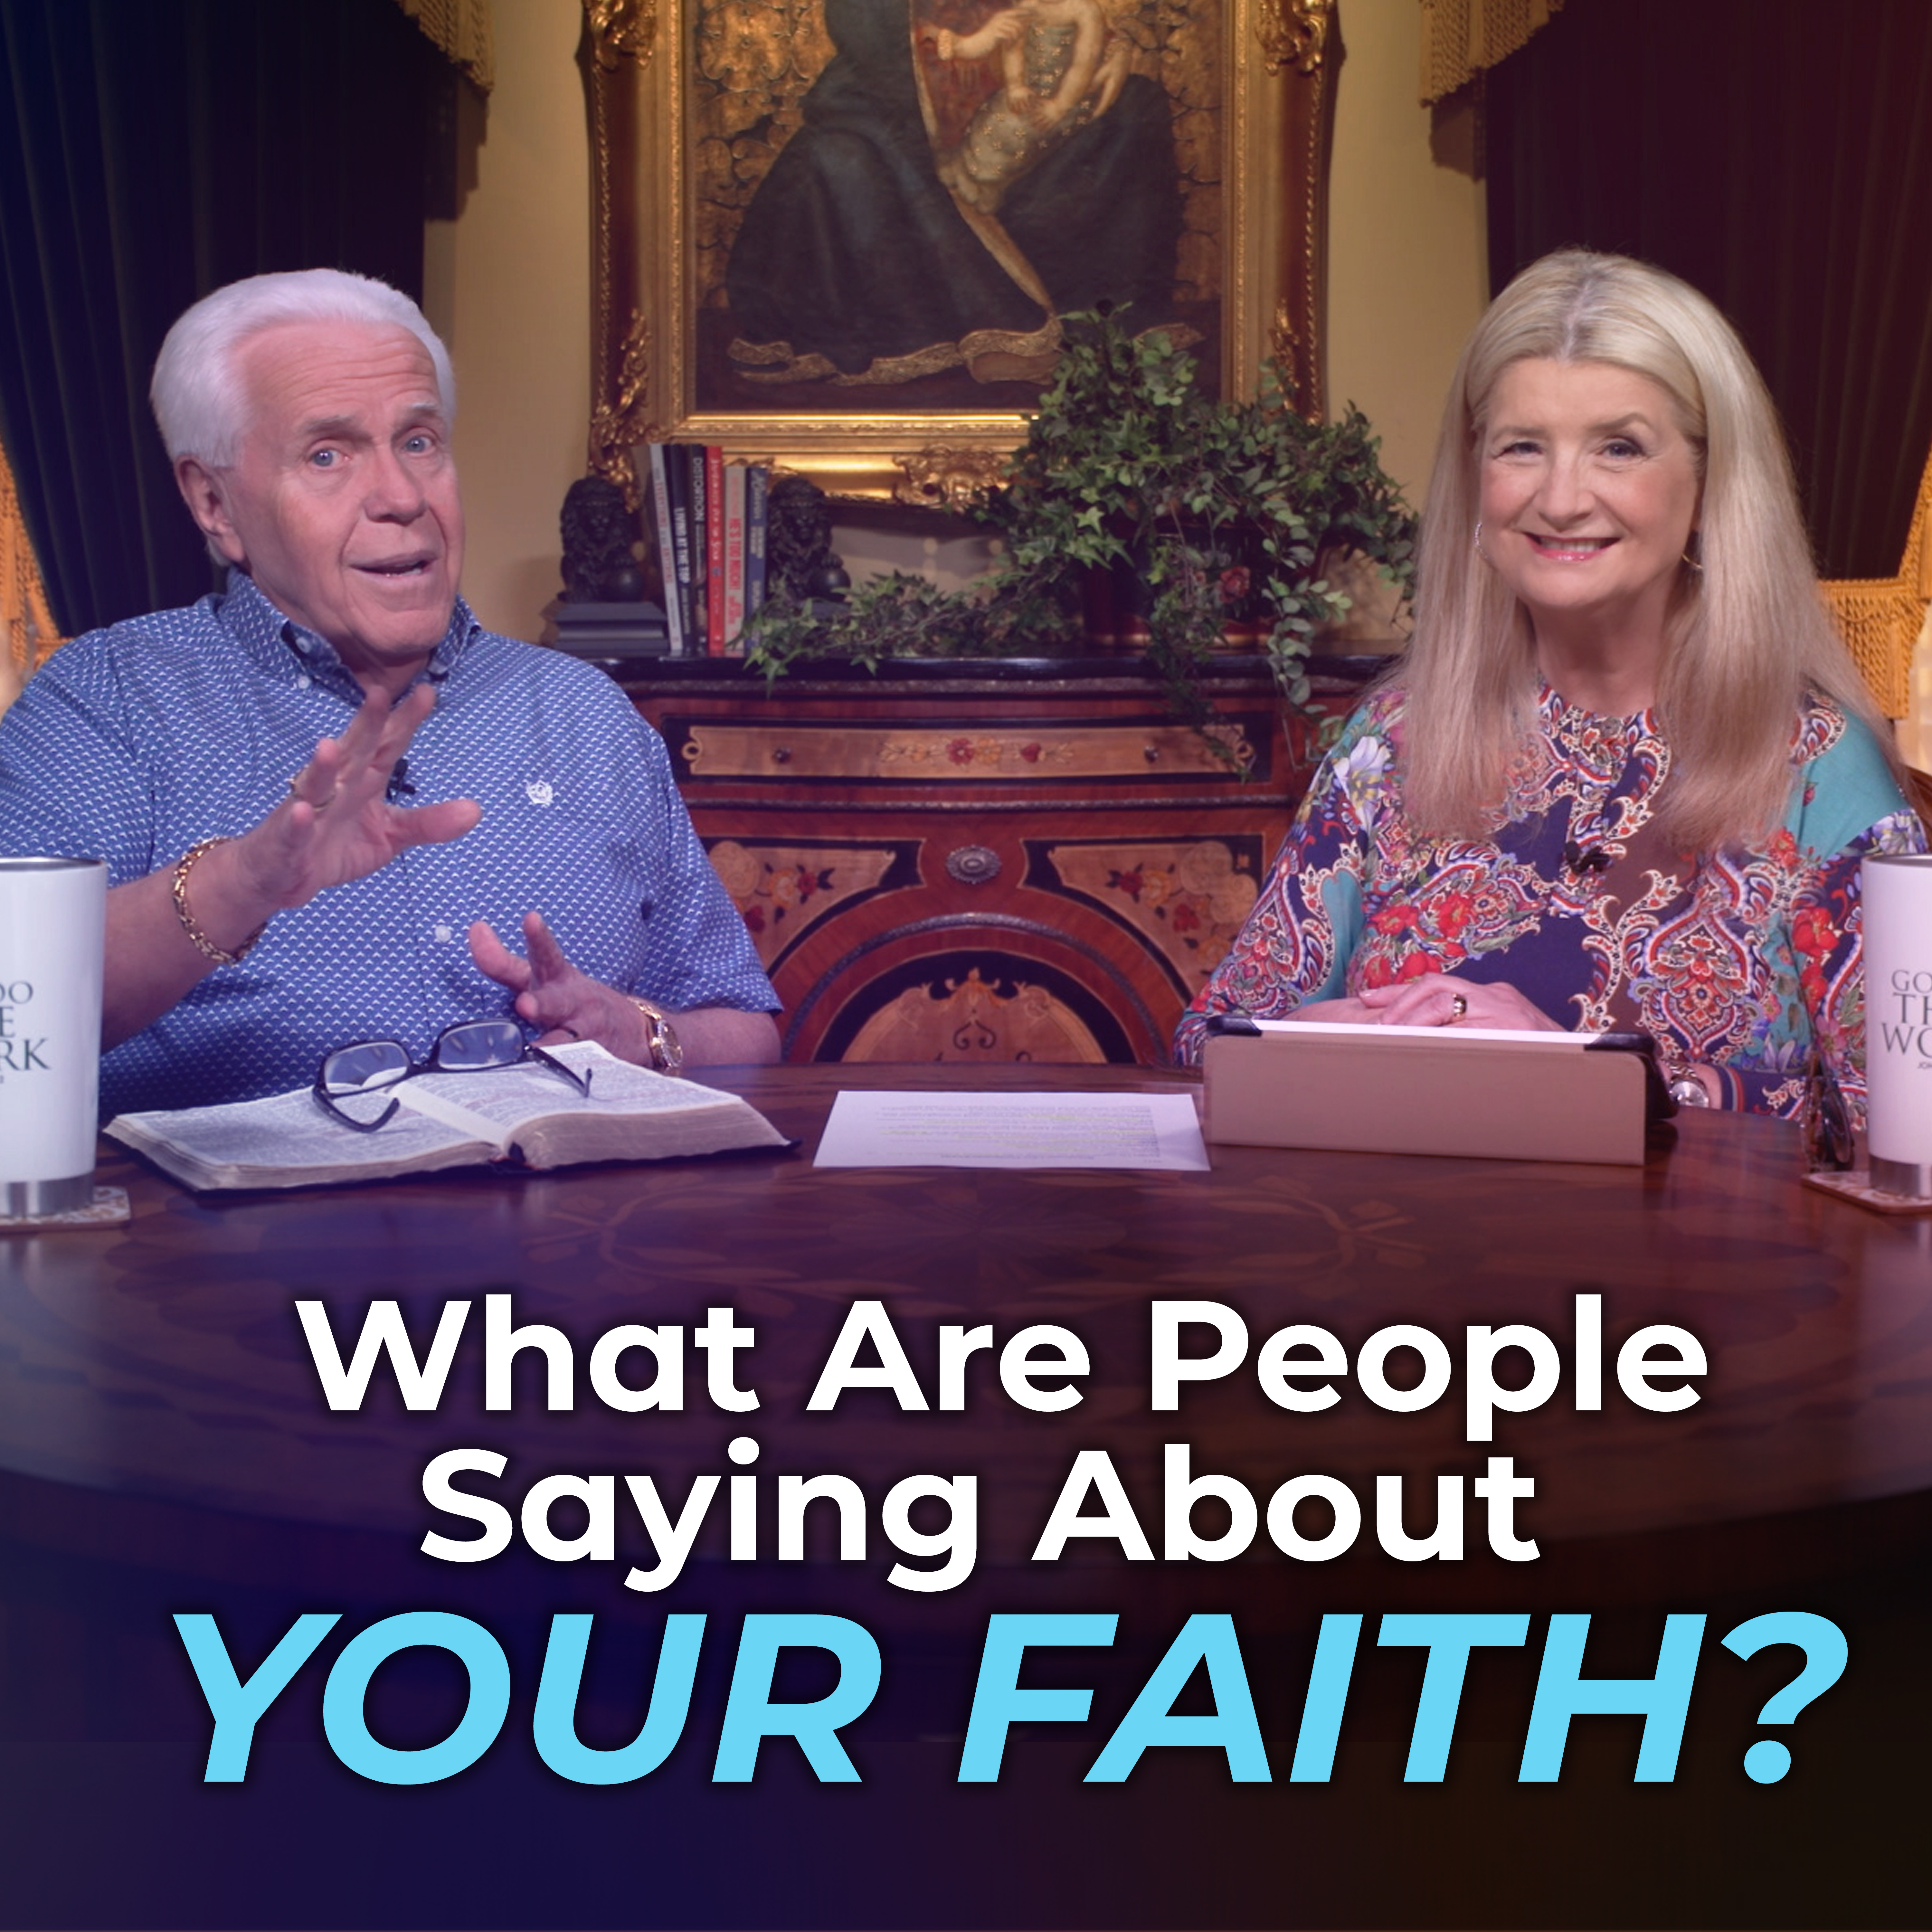 What Are People Saying About Your Faith?